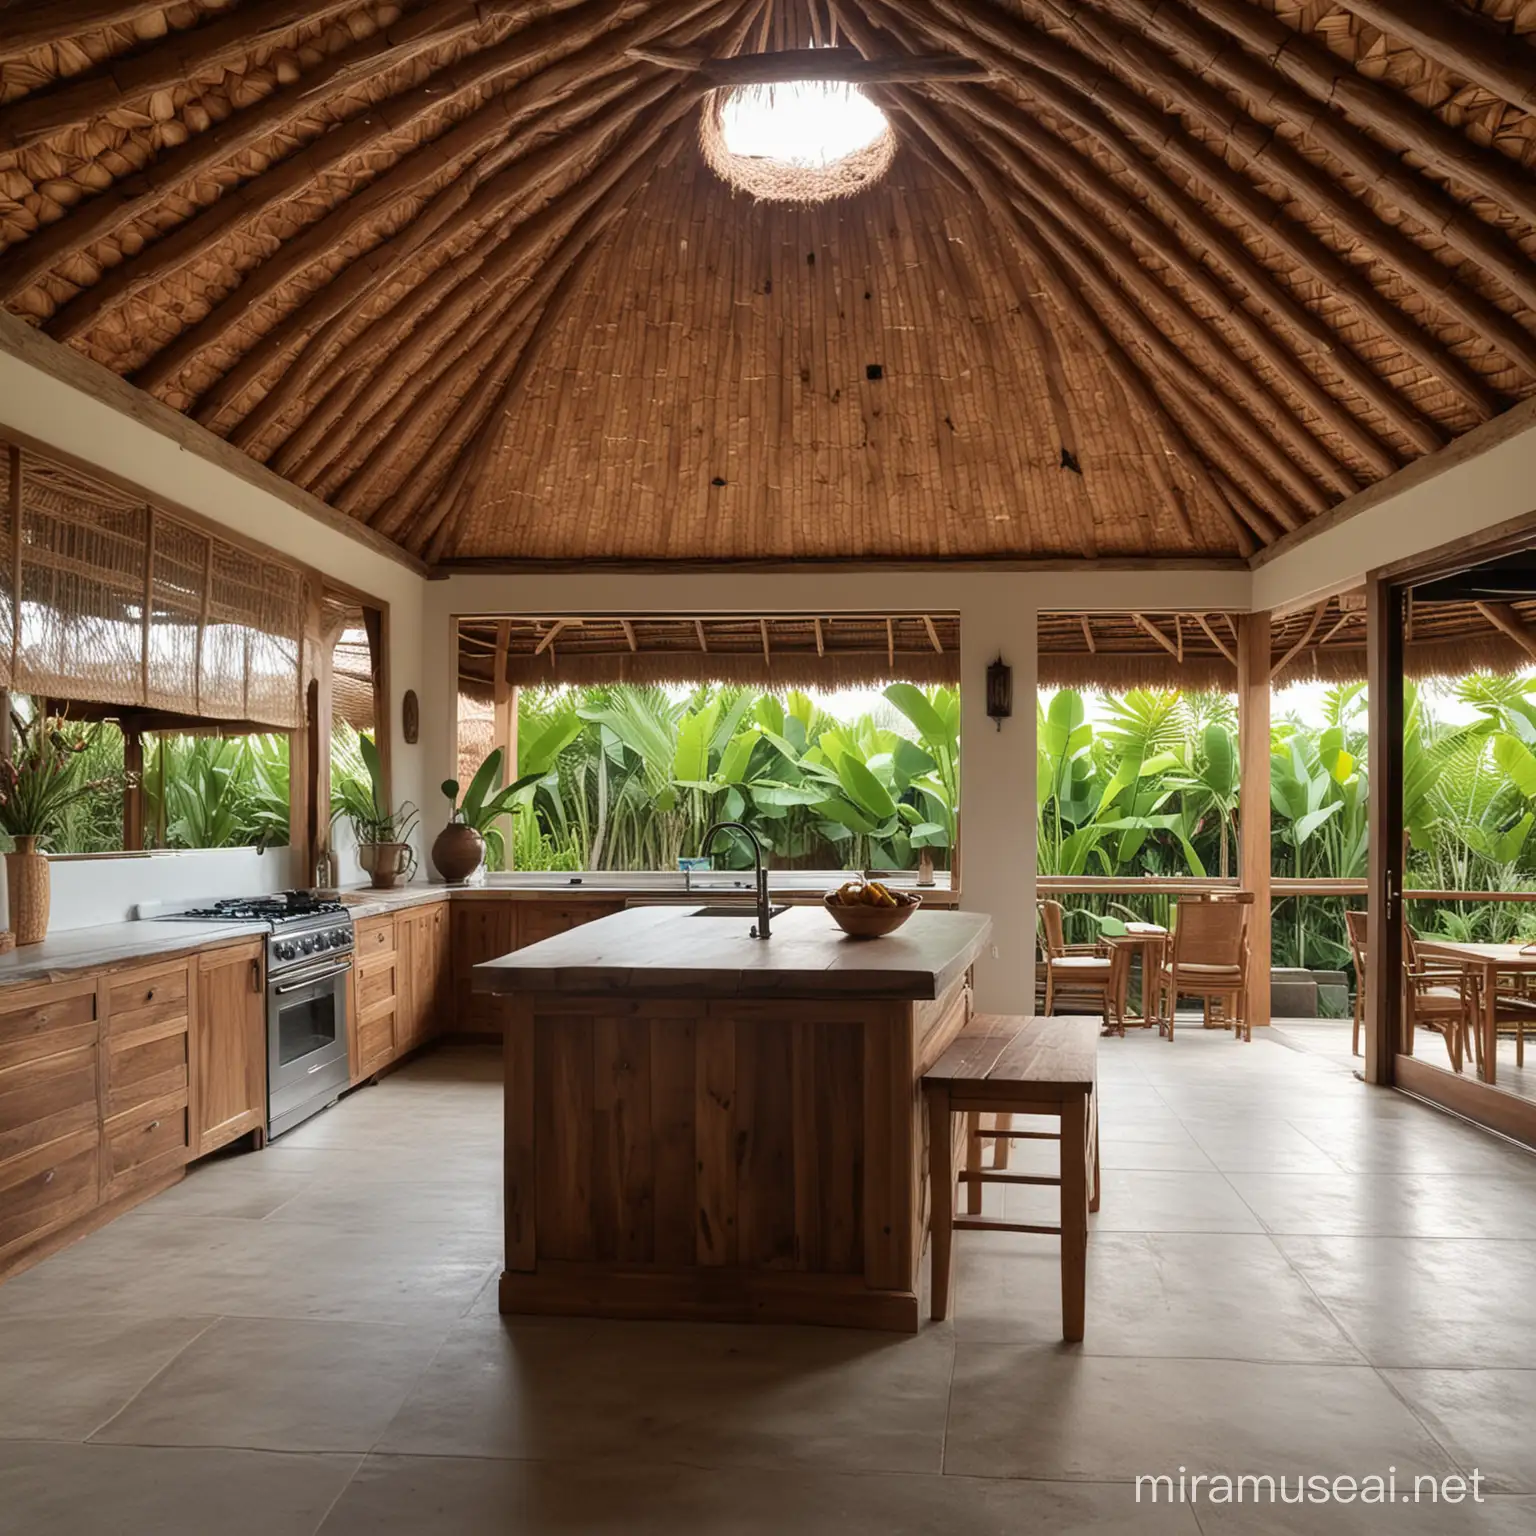 Traditional BaliStyle Kitchen with Wooden Roof and Elegant Decor